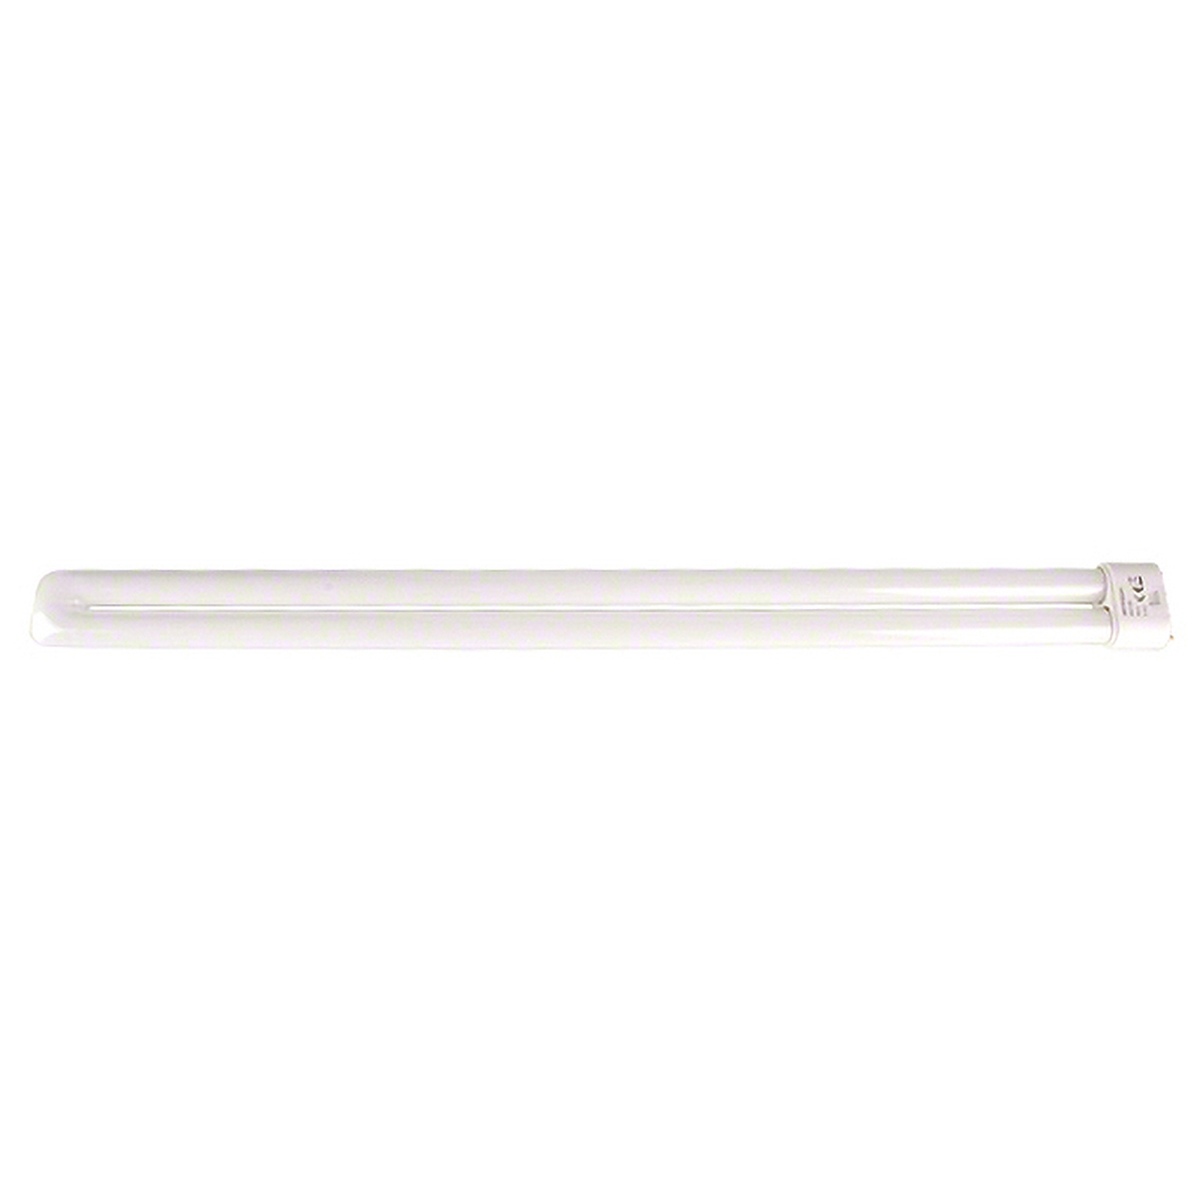 Walimex Replacement Fluorescent Lamp 110W to 660W